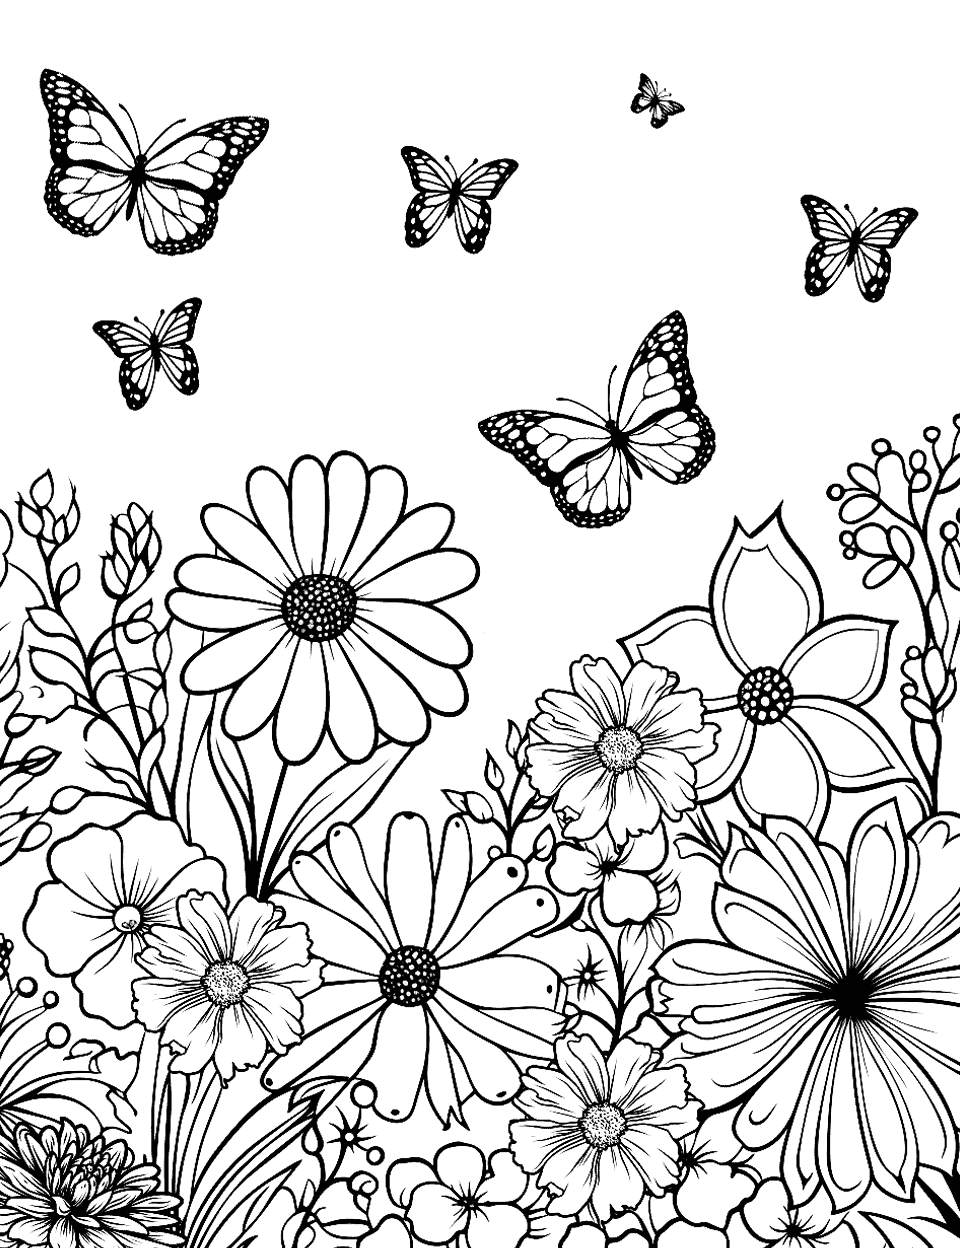 Spring Garden Bliss Nature Coloring Page - A garden full of spring flowers, with butterflies flying around.